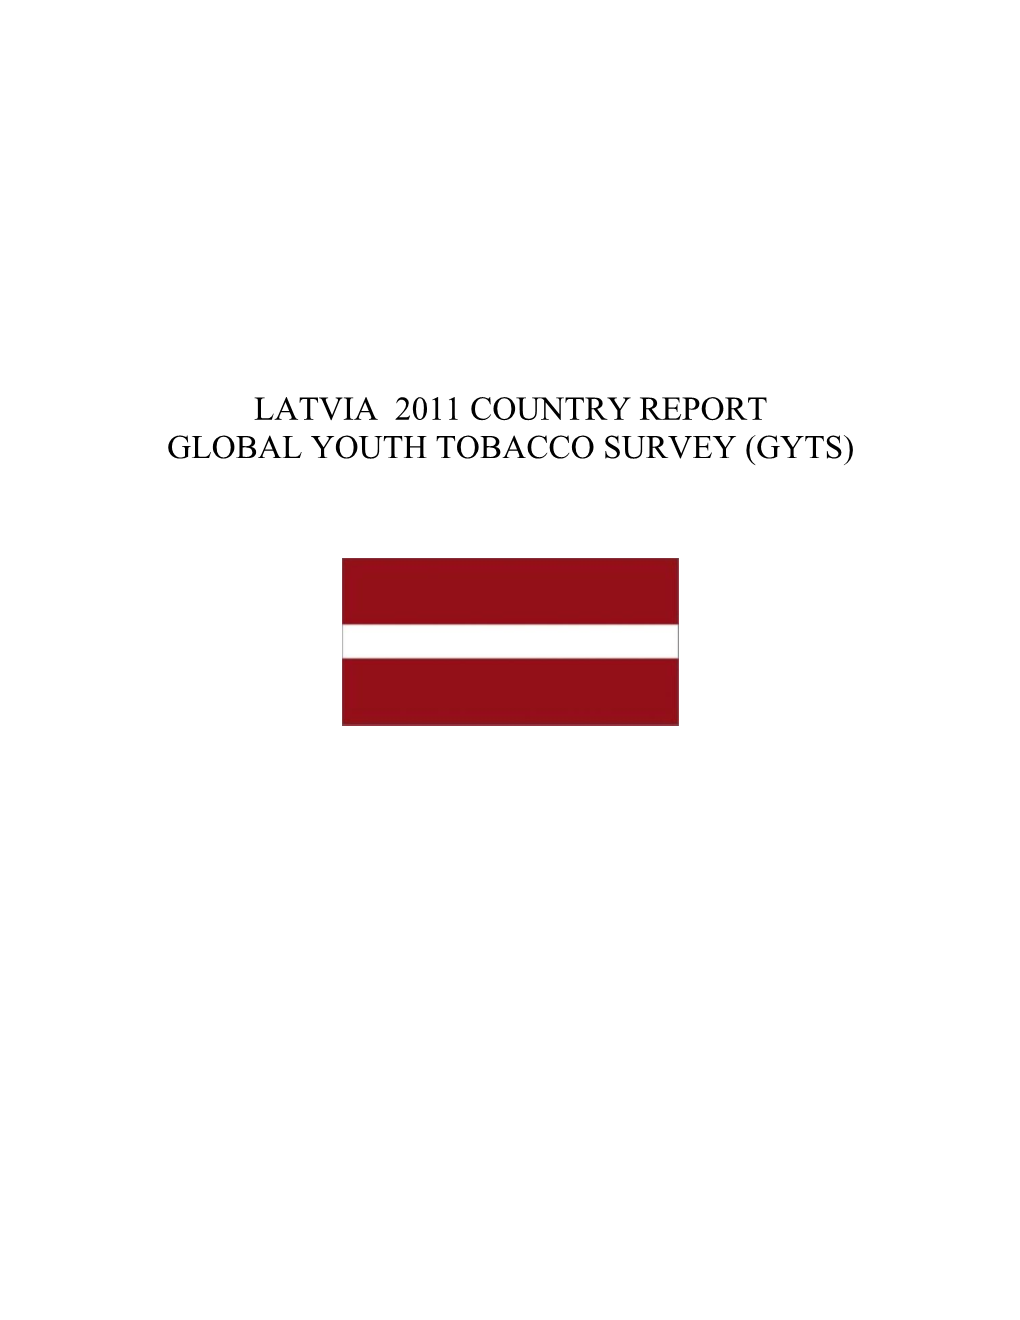 Latvia 2011 Country Report Global Youth Tobacco Survey (Gyts)